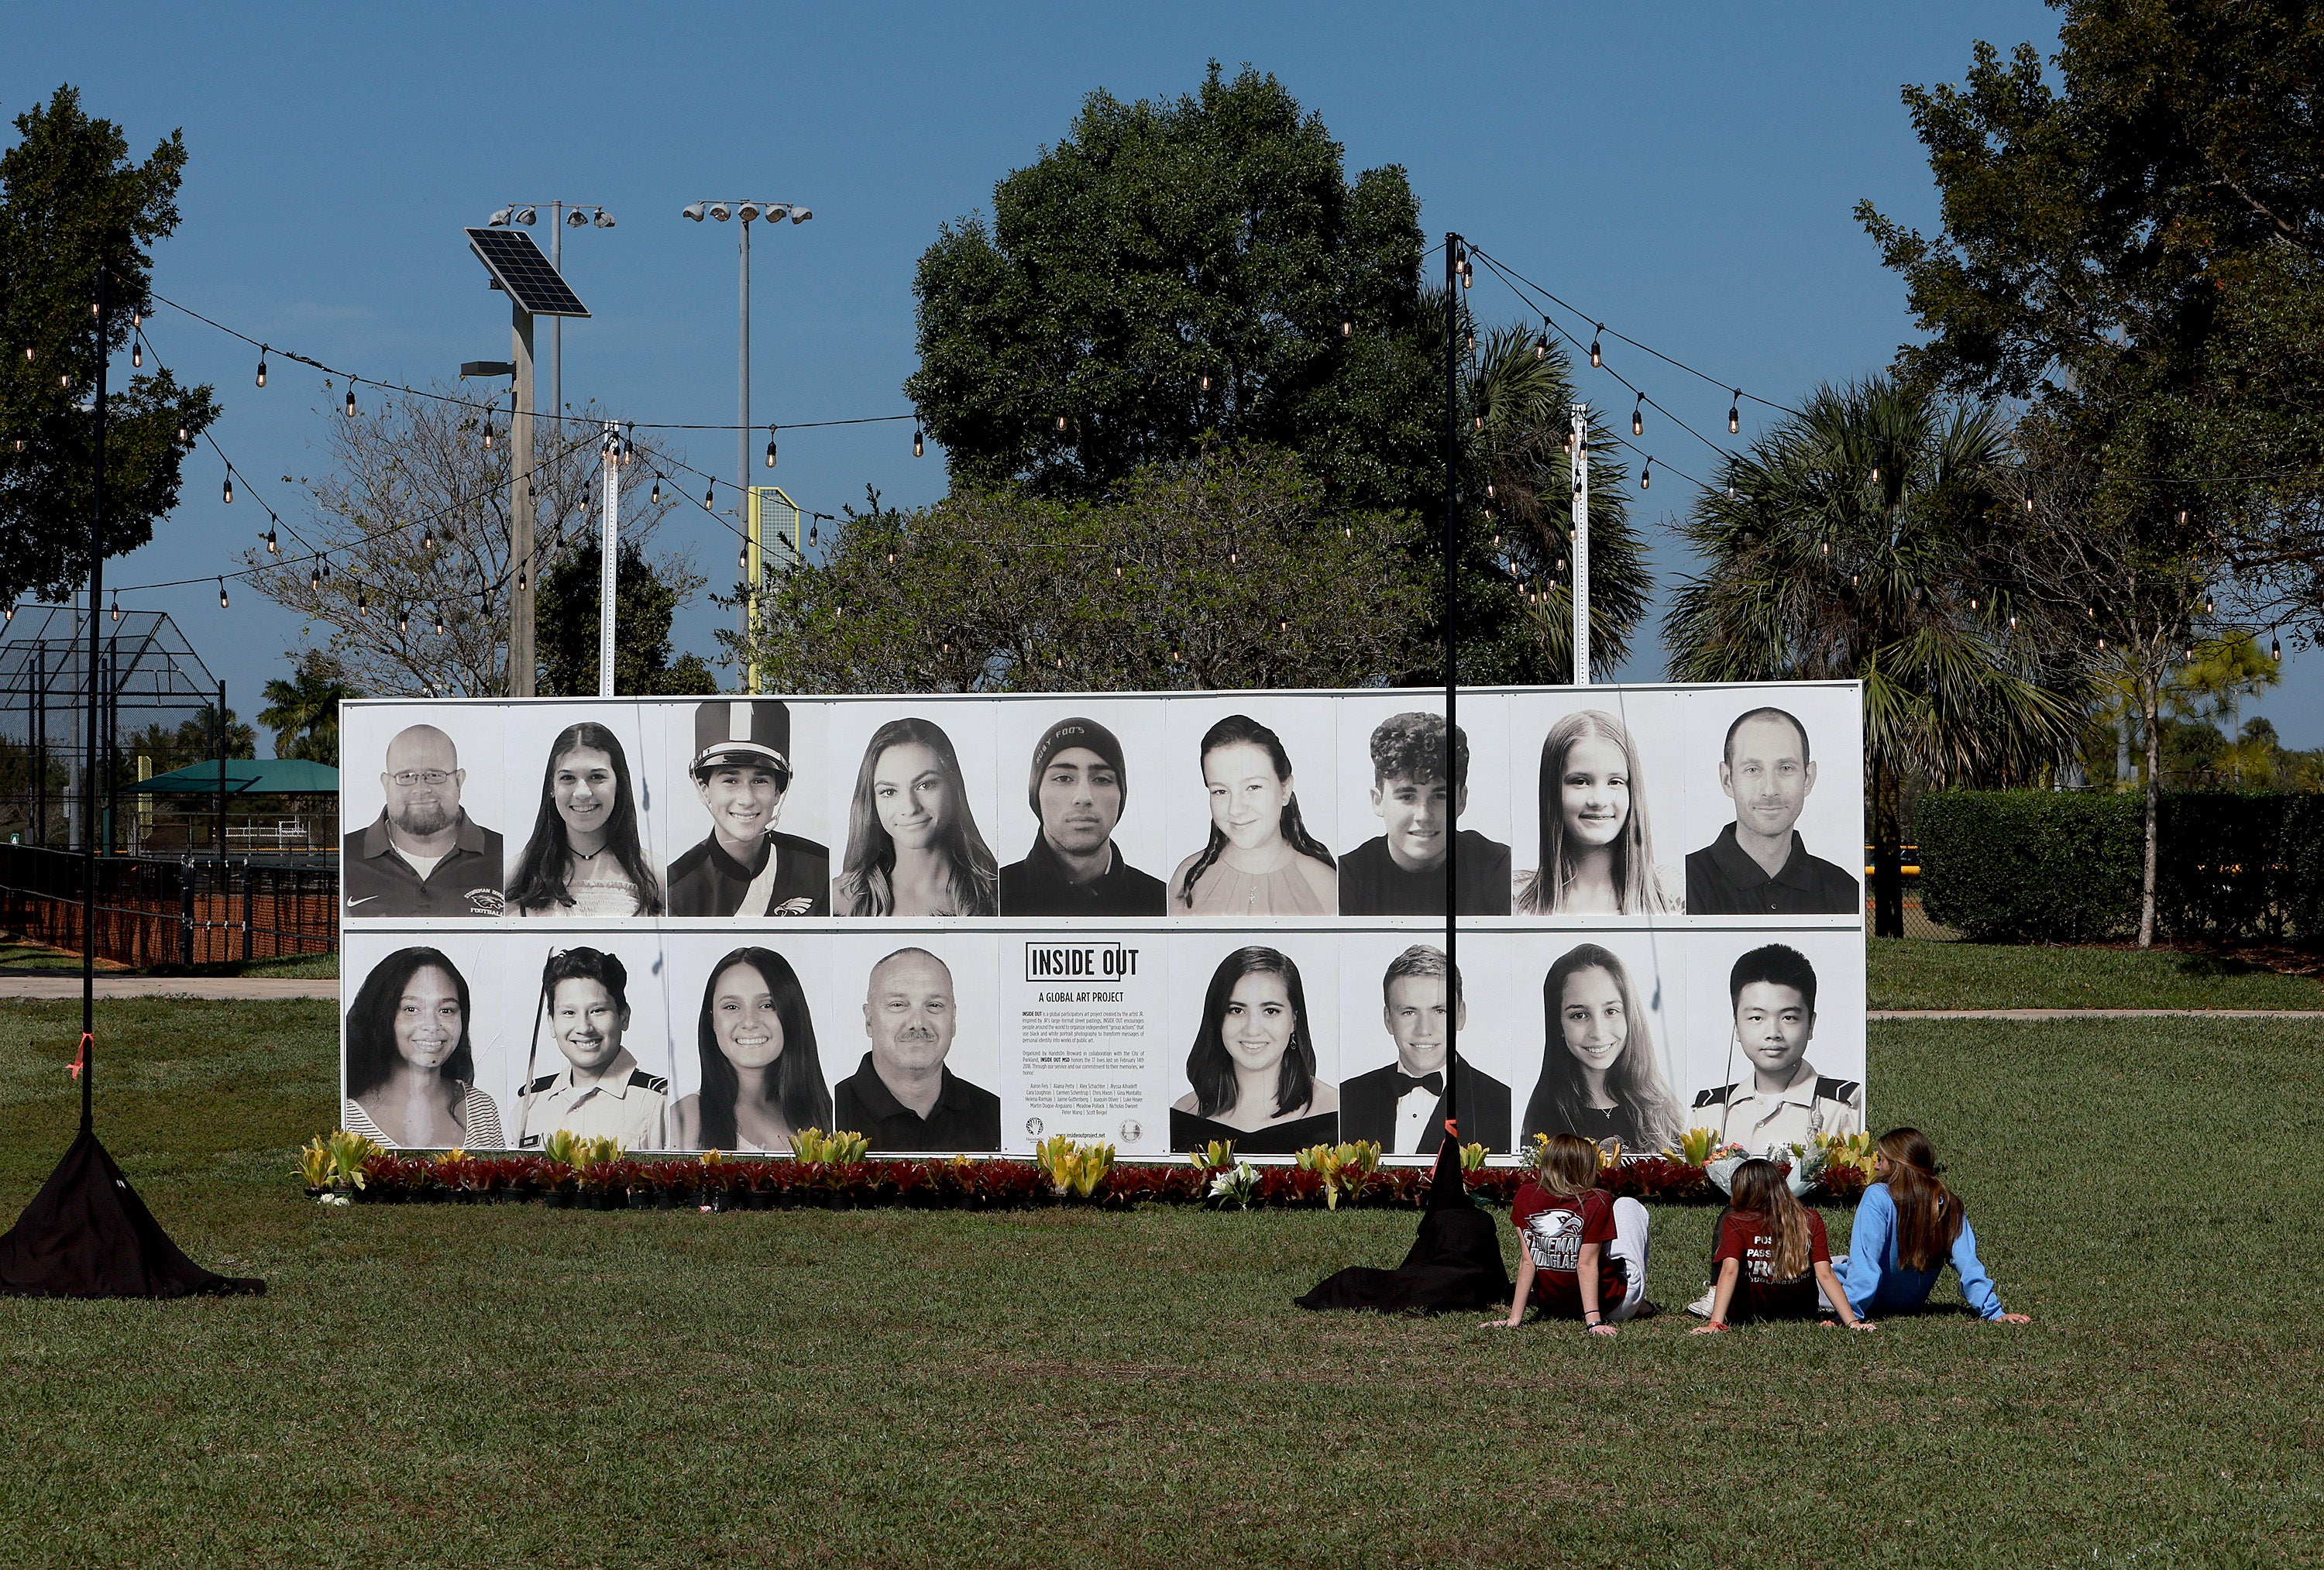 People sit in front of a photo display of the 17 people killed at Marjory Stoneman Douglas High School during a mass shooting on February 14, 2022 in Pine Trails Park in Parkland, Florida